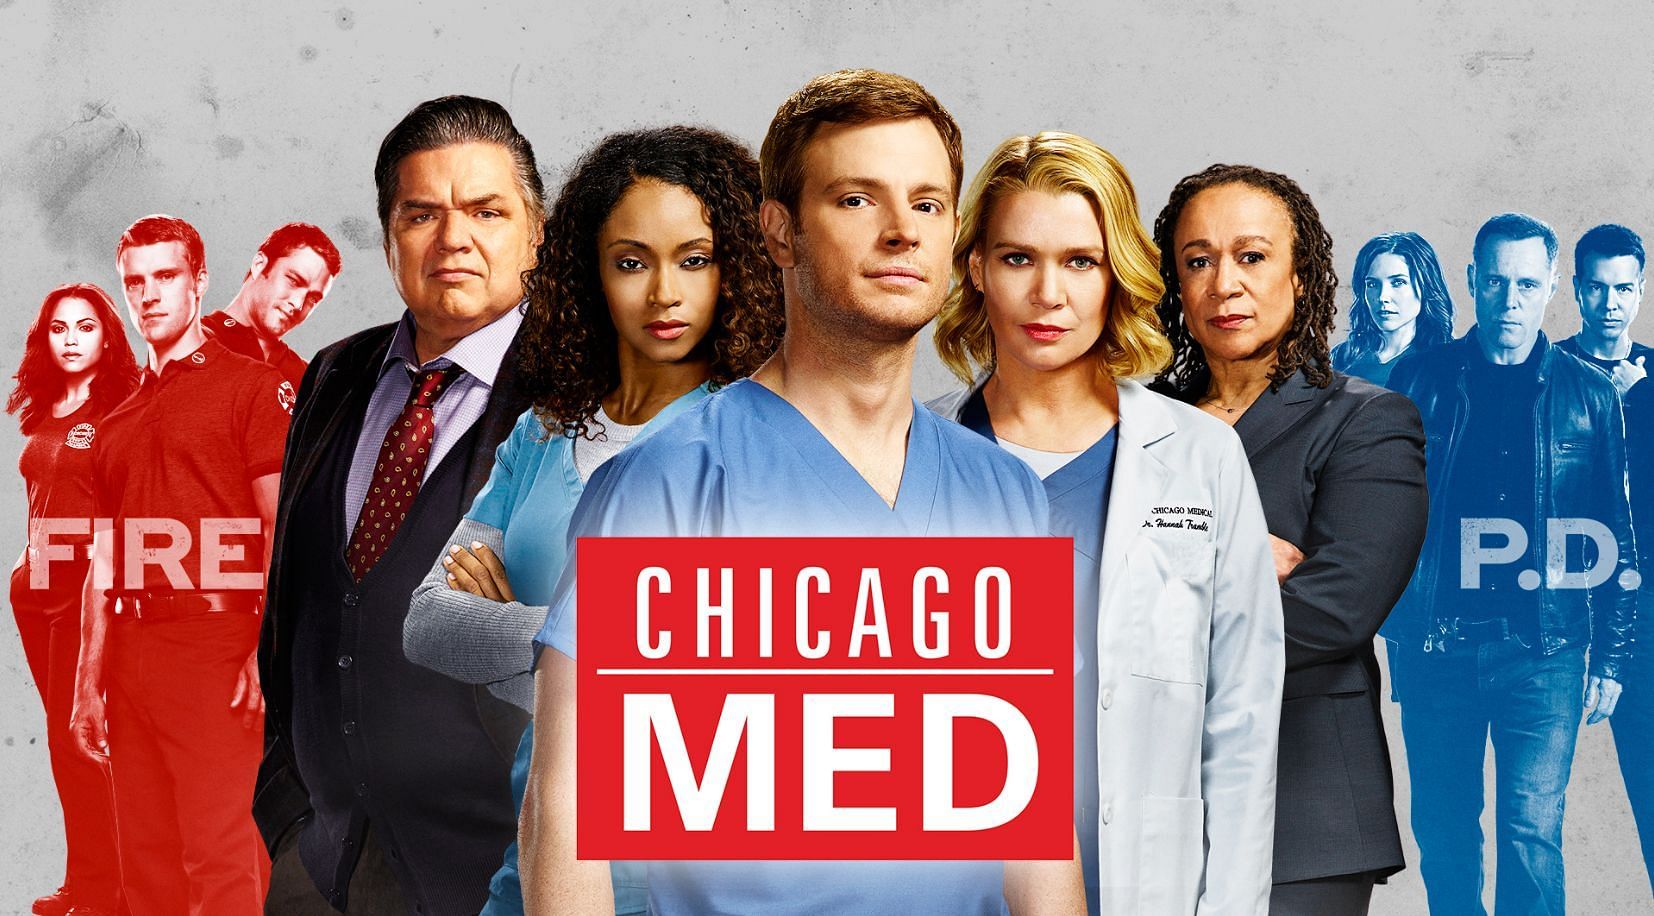 The poster for Chicago Med (Image via NBC)